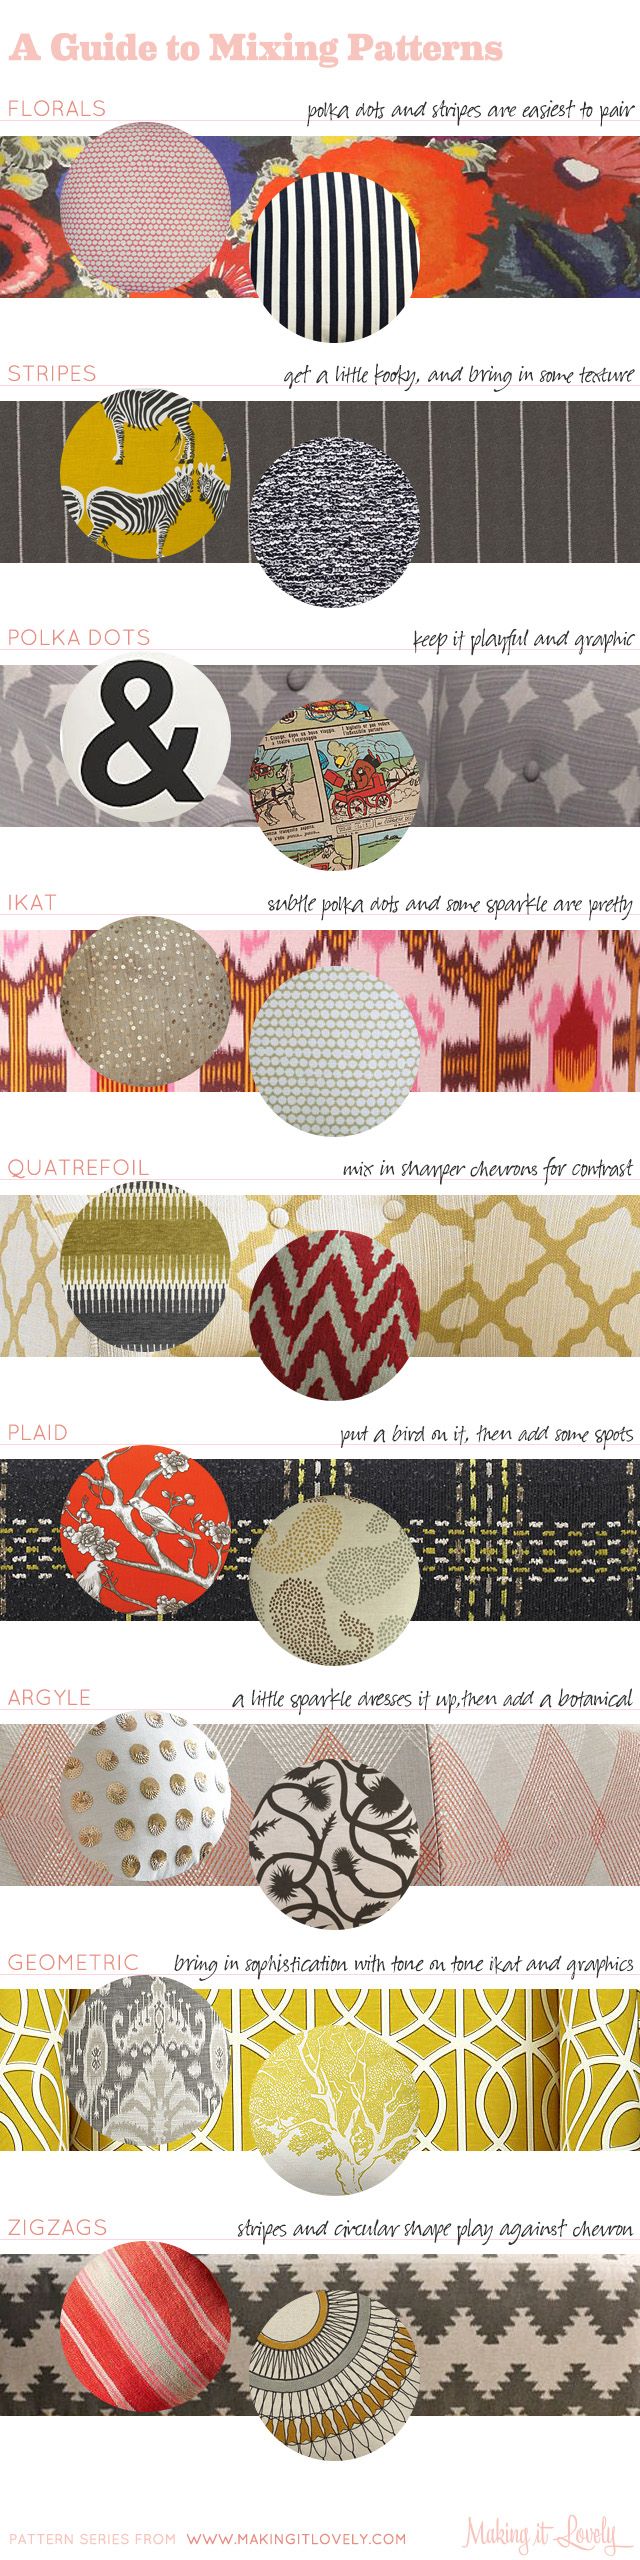 A Guide to Mixing Patterns in Your Home